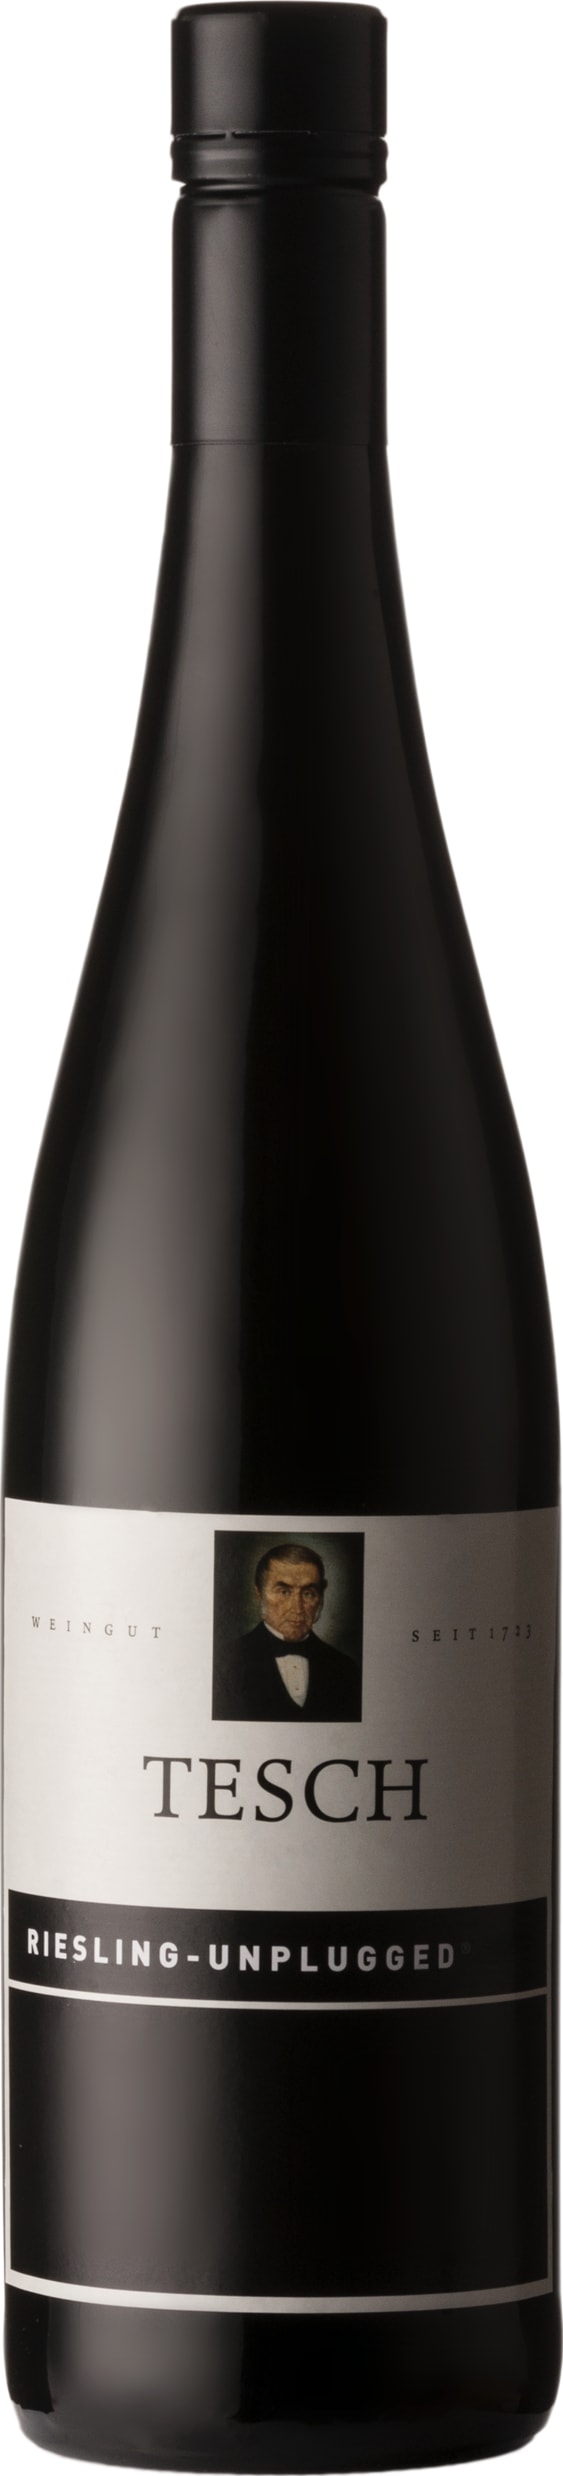 Weingut Tesch Riesling Unplugged 2021 75cl - Buy Weingut Tesch Wines from GREAT WINES DIRECT wine shop